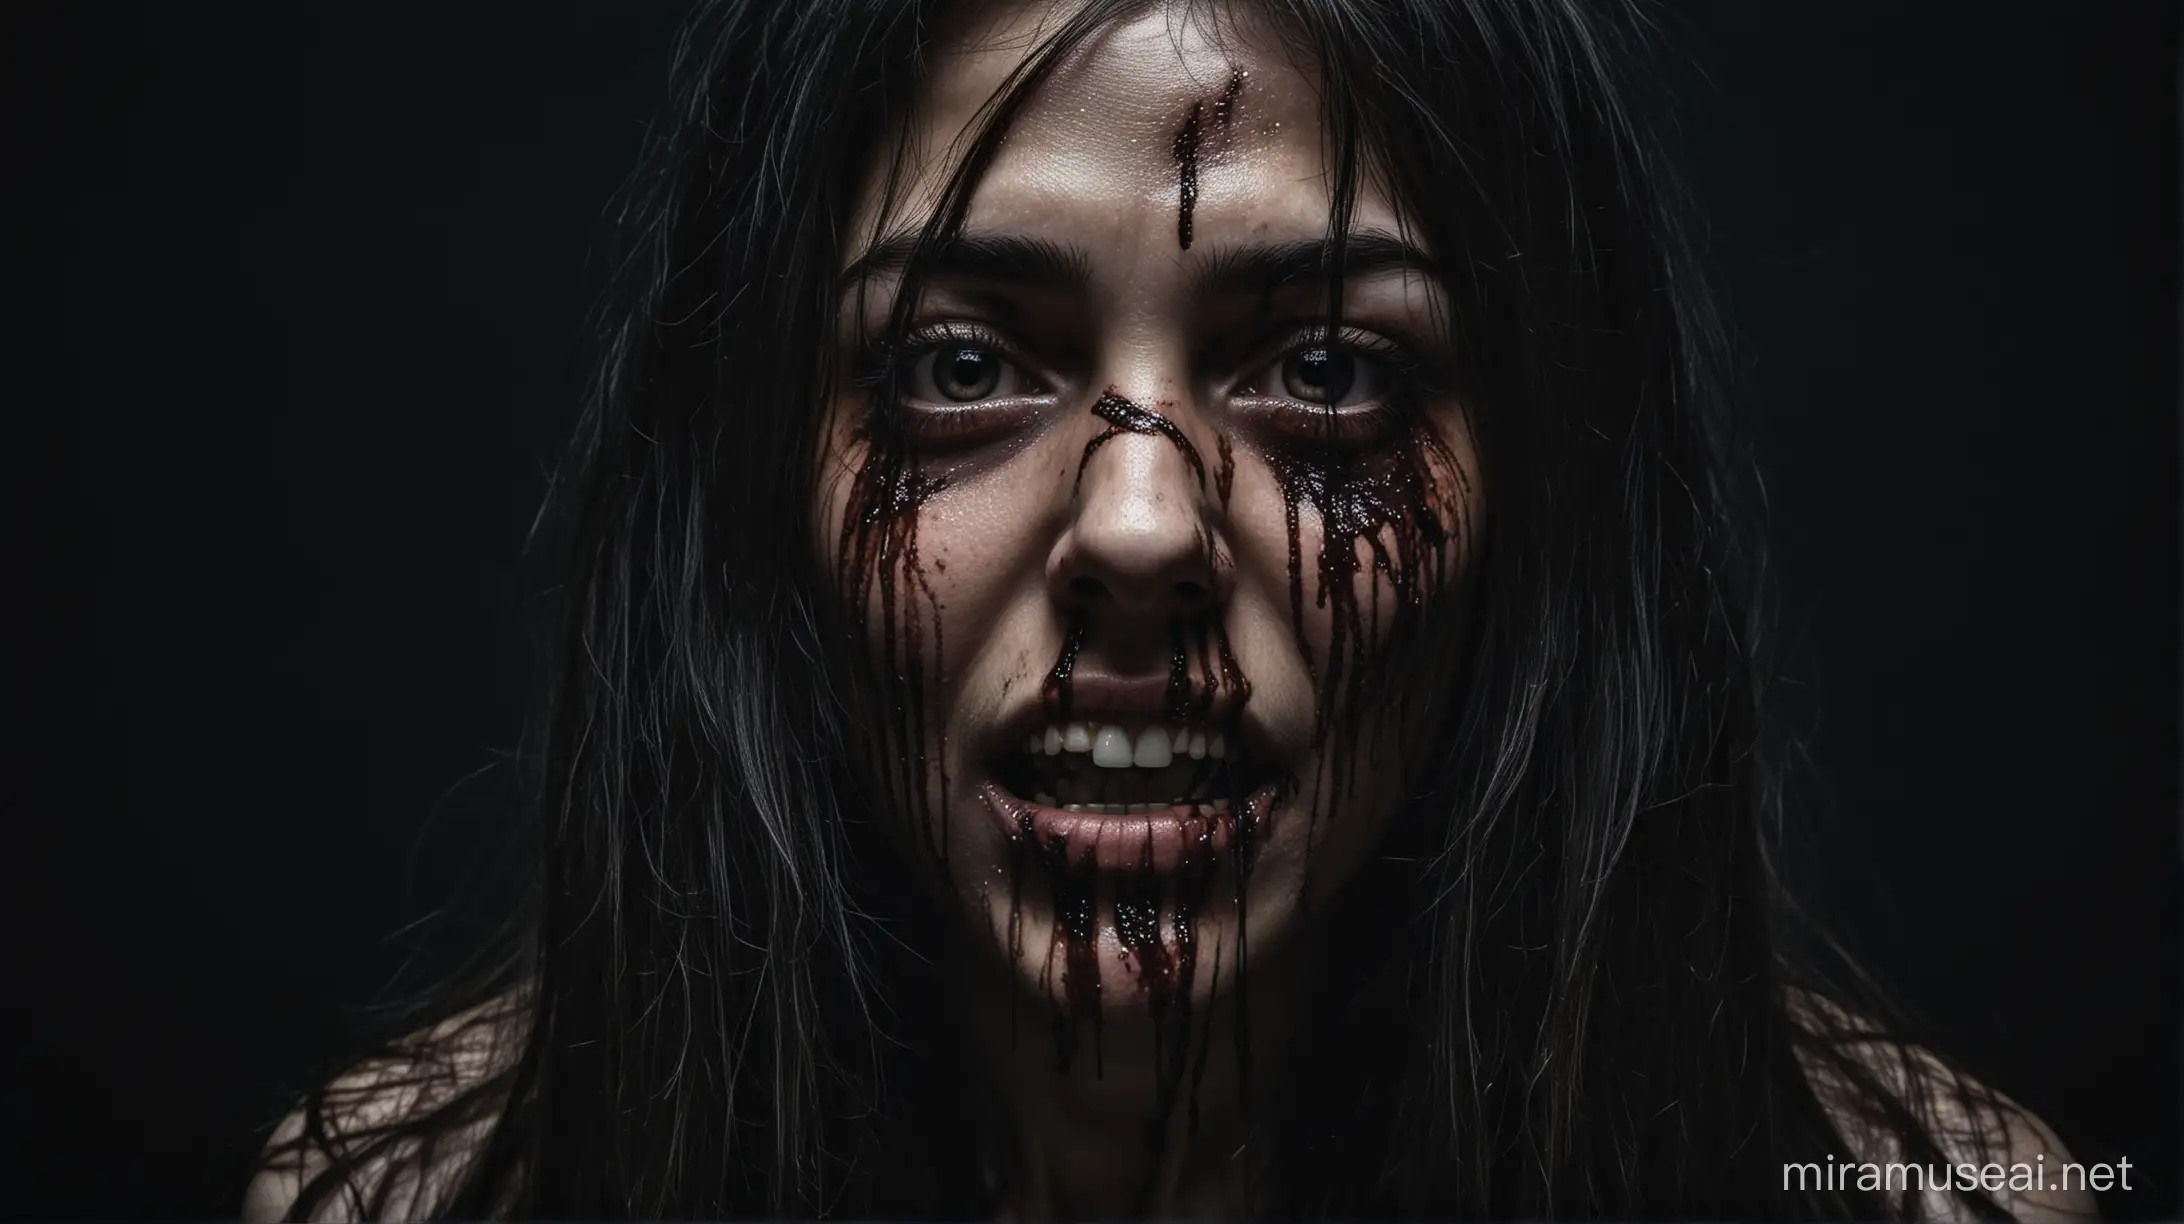 A girl on a black background, with long hair, the left side of her face is open, the right side of her face is scary, mutilated, an image in horror style